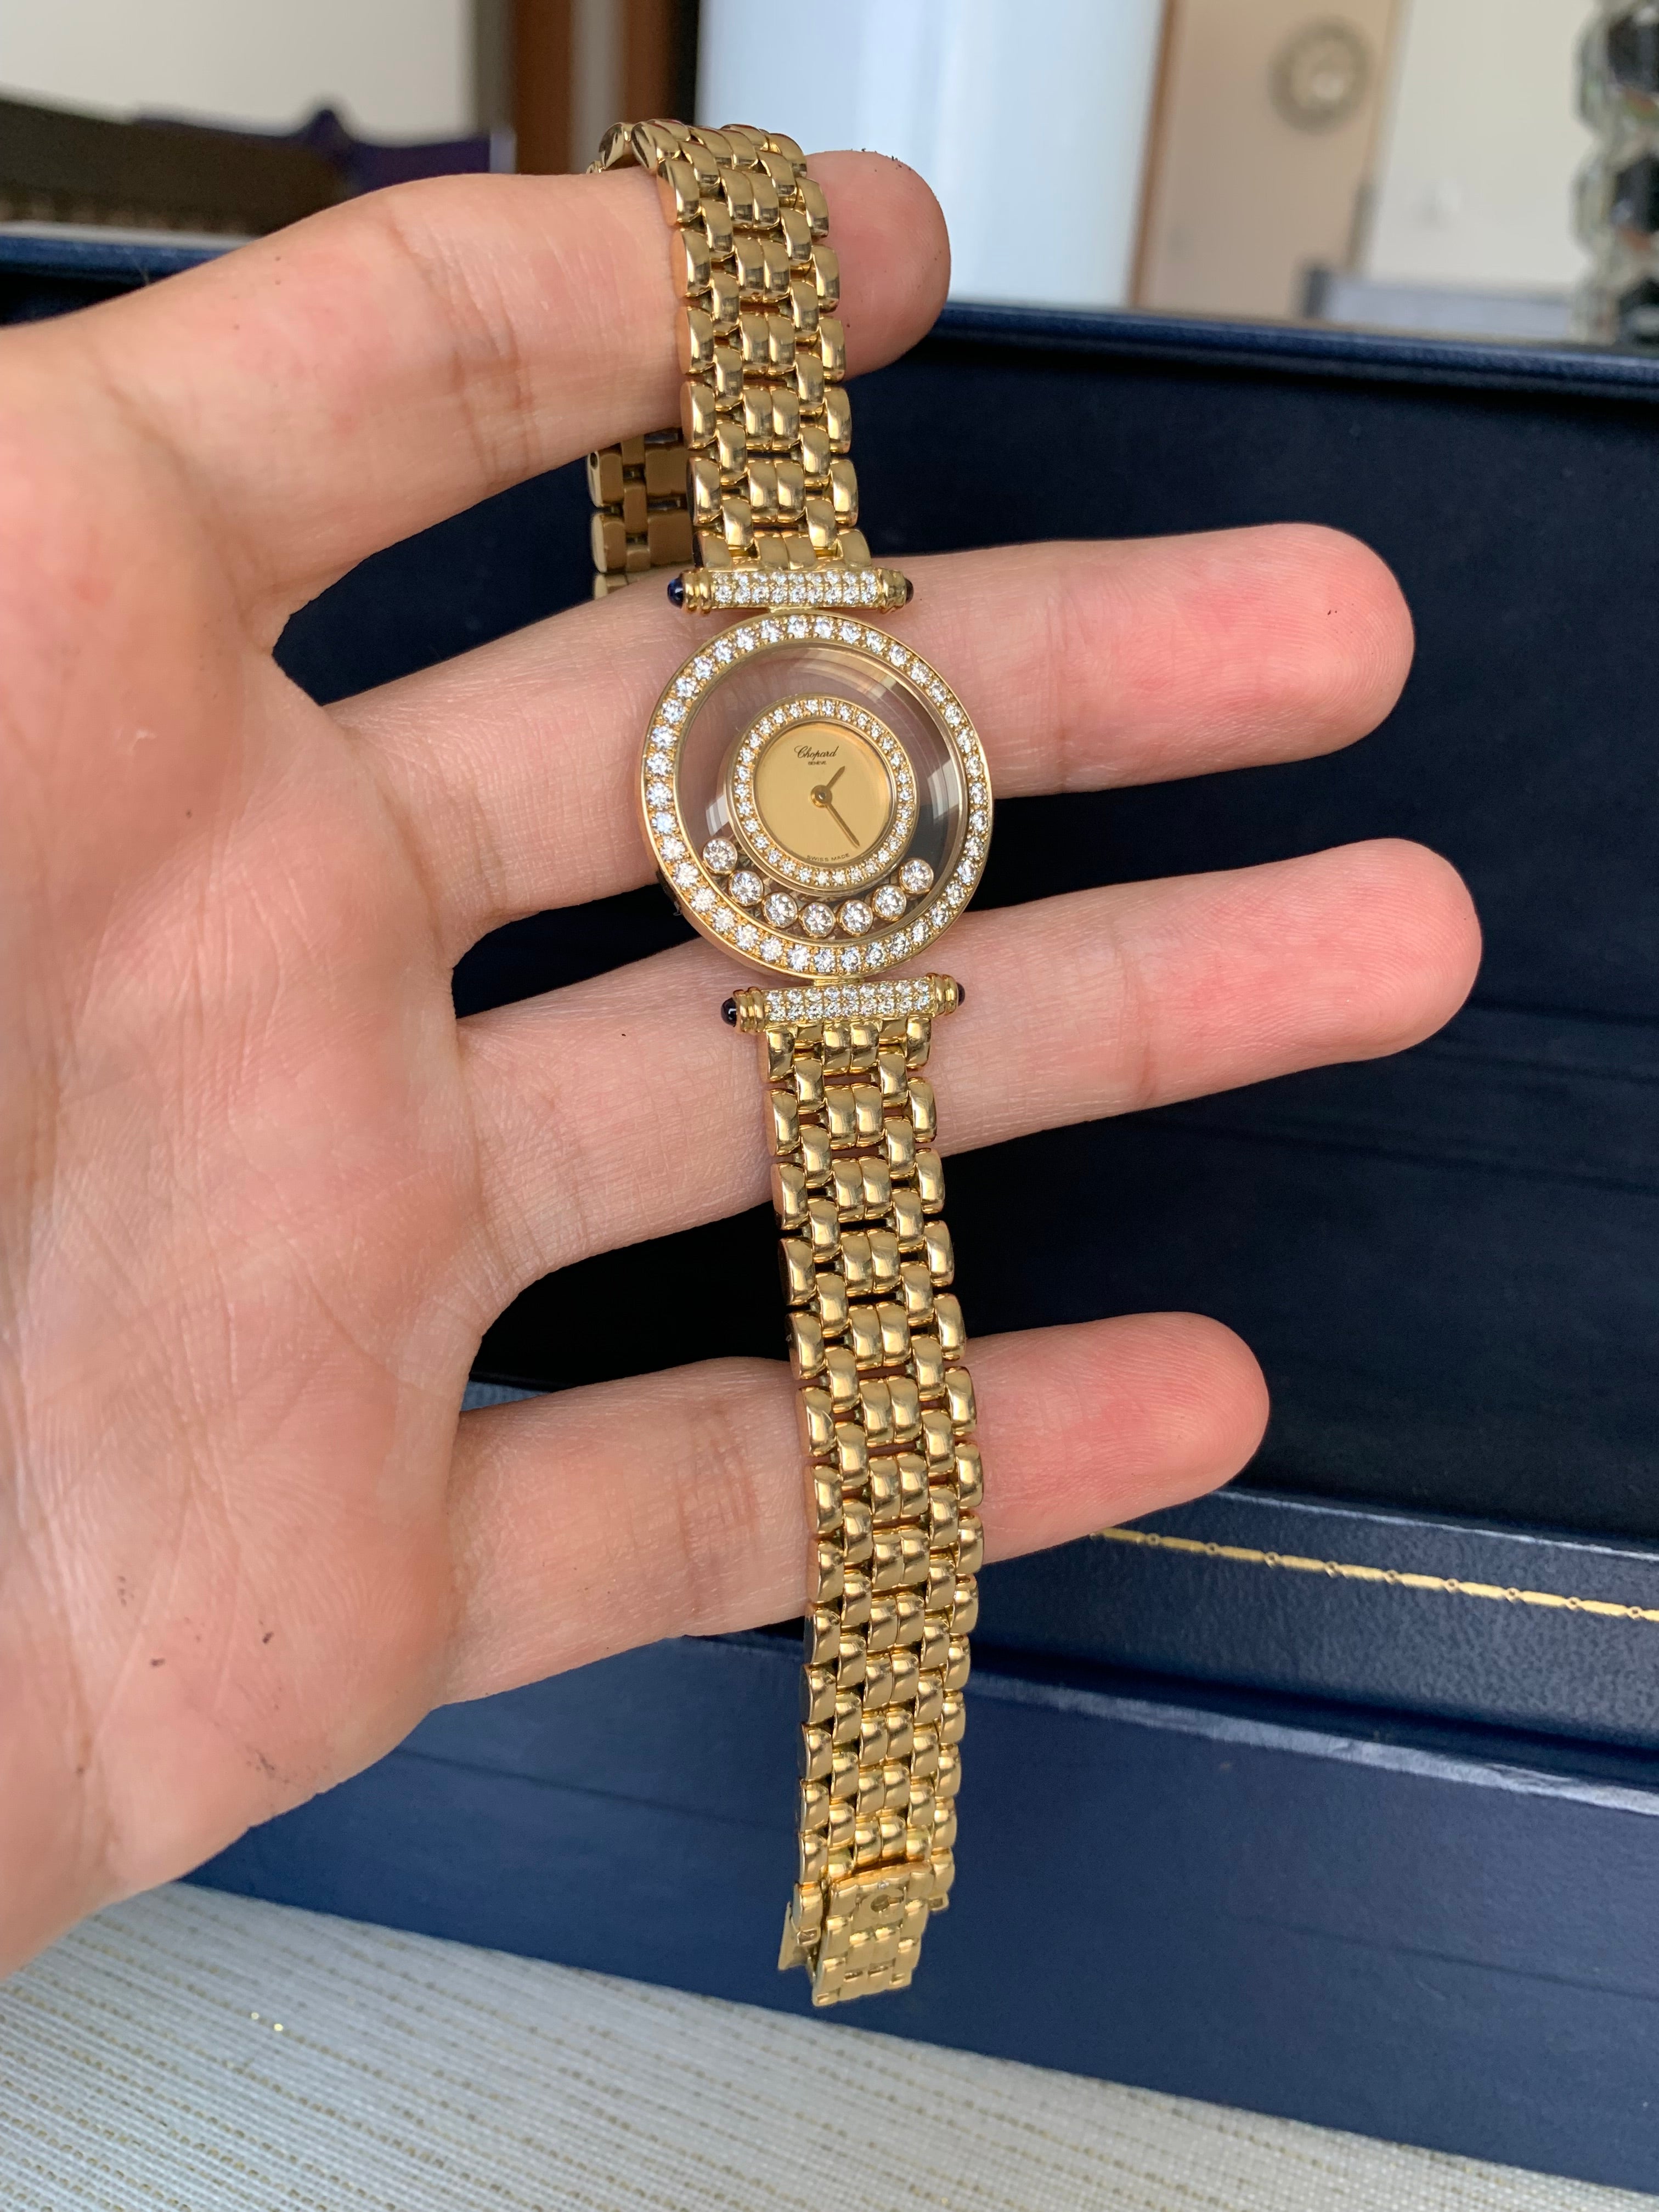 Chopard Happy Diamonds, Swiss Made, In Solid 18k Yellow Gold, Both Case & Bracelet.
Amazing Shine, Incredible Craftsmanship.
Great Statement Piece.
Factory Set Diamonds On The Case, Bezel & Lugs.
Set With Cabochon Blue Sapphires As Well.
Real Work